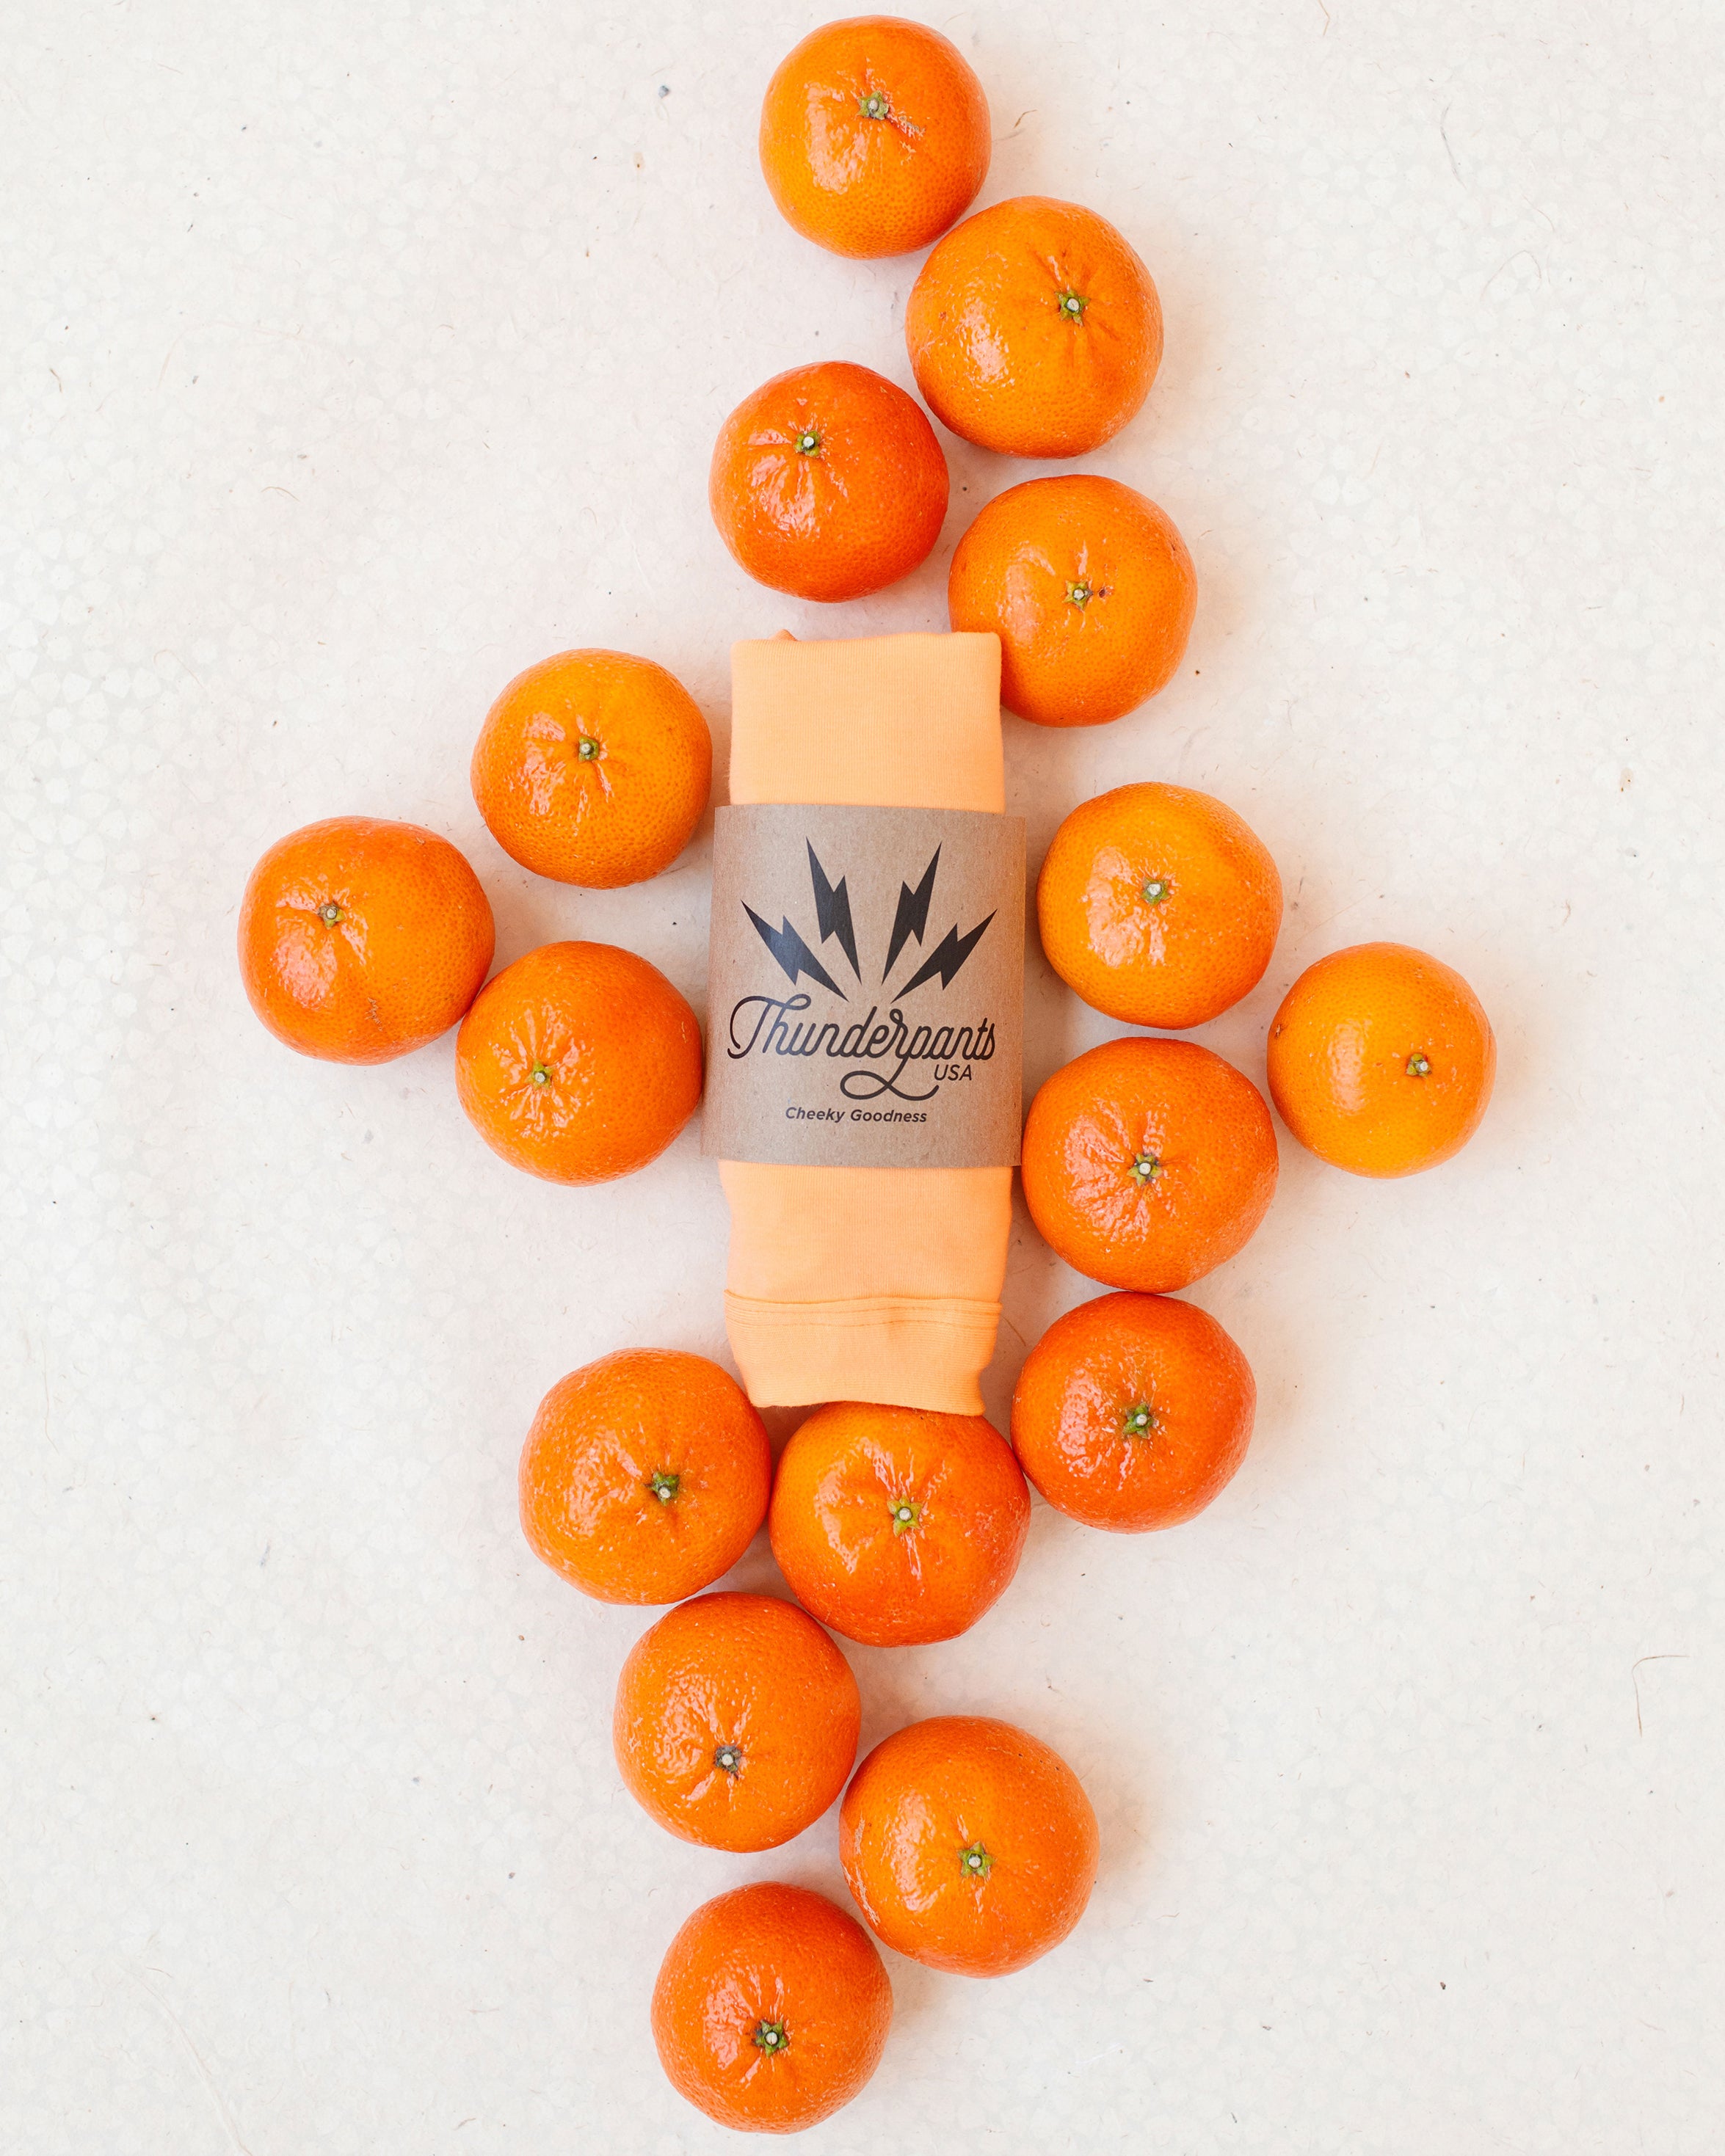 Flat lay of packaged Orange Sherbet underwear on a white patterned surface with oranges surrounding it.